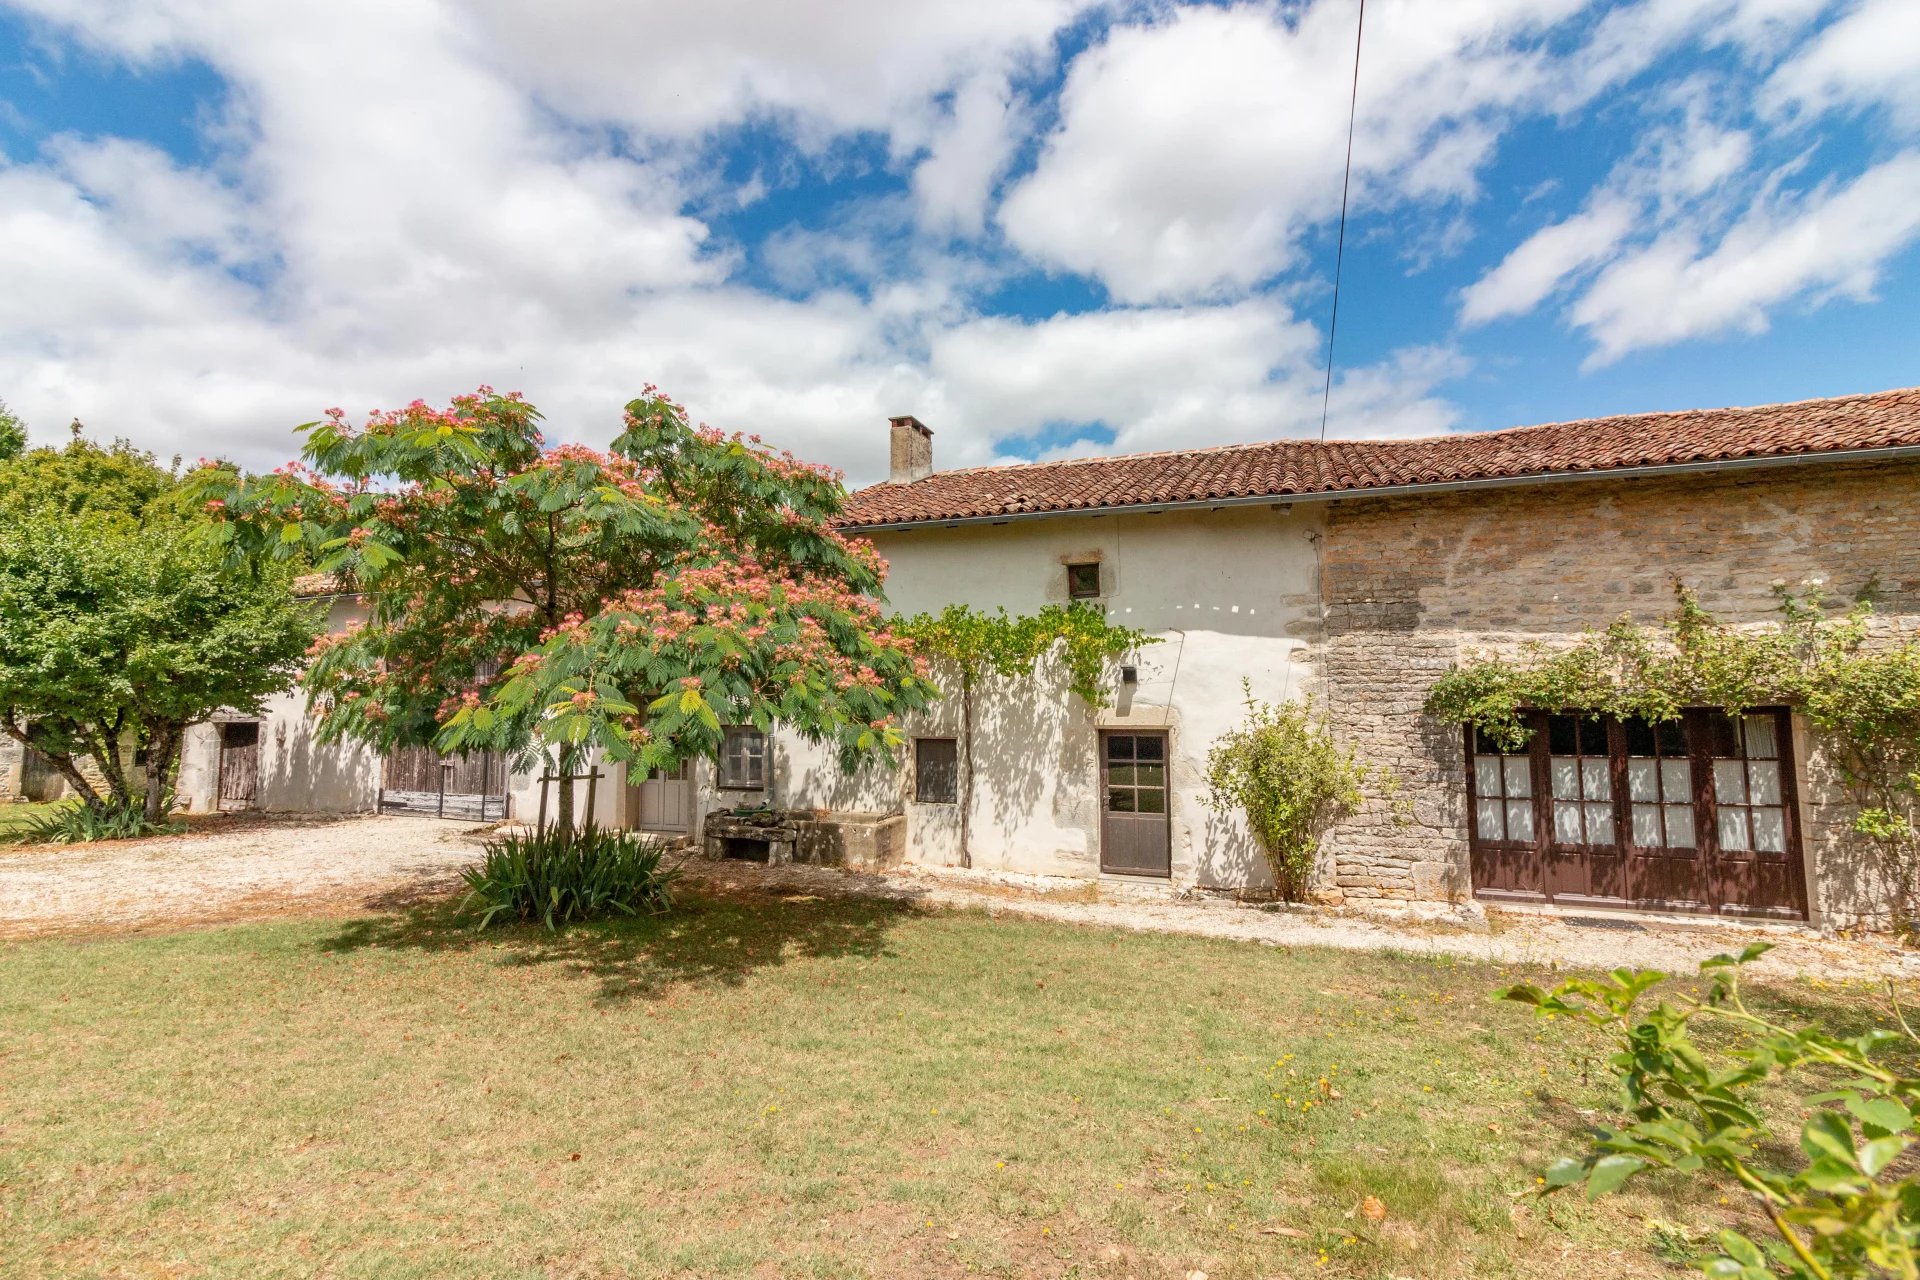 Spacious house with guest house, barns and pool